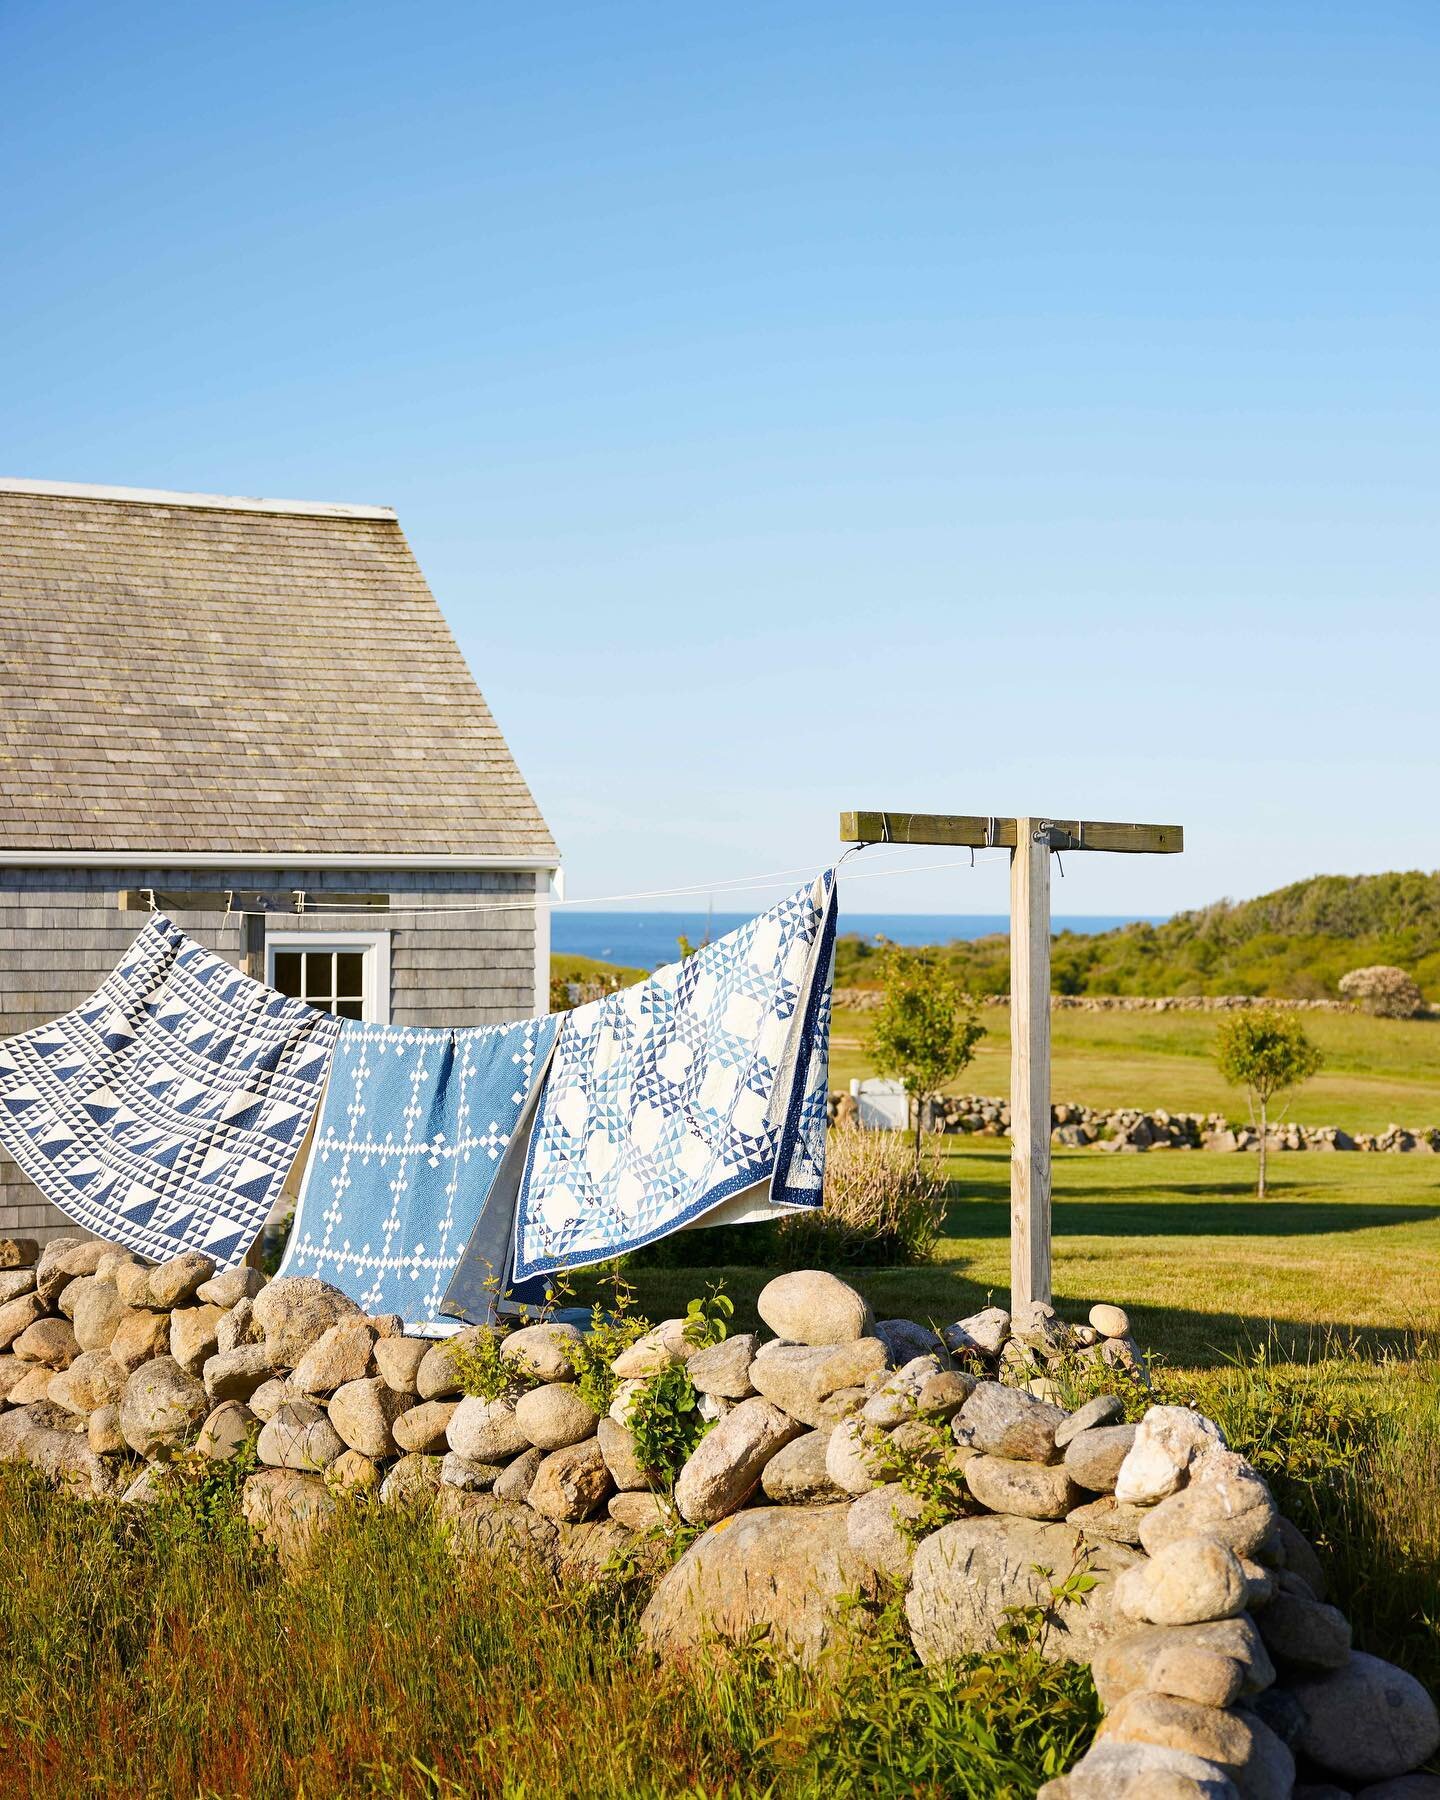 &quot;I start shopping at the world-famous Brimfield Antiques Market at 5AM with a flashlight and tape measure, two flea market essentials,&quot; says Tori Jones, proprietor of Block Island&rsquo;s @torijonesstudio. Describing her style as &ldquo;mag